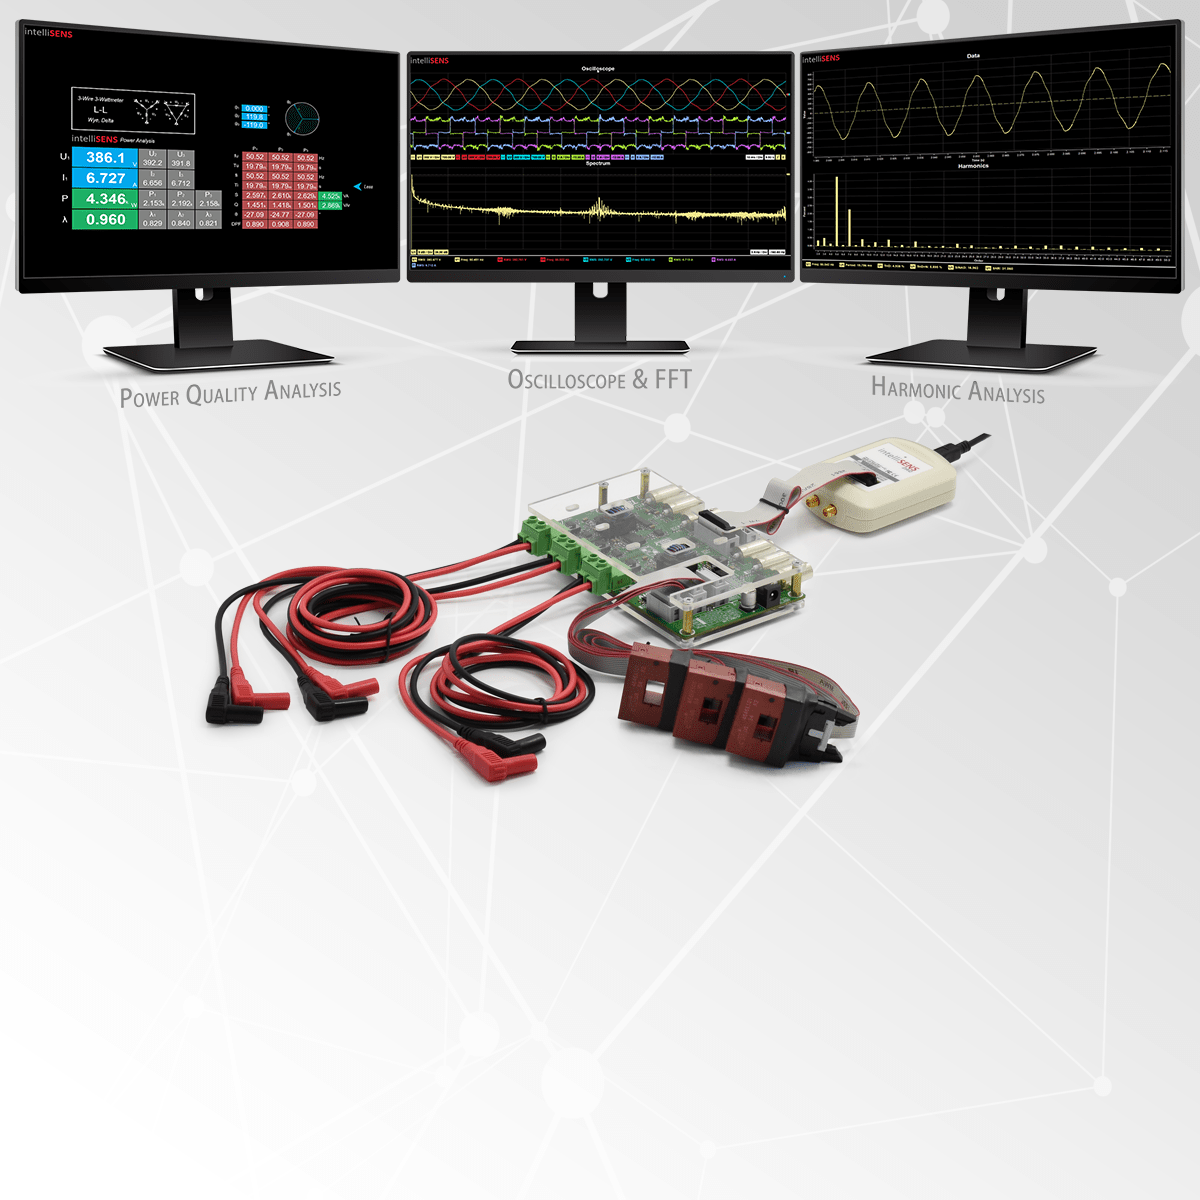 Power Electronics Measurement and DAQ System that can replace 3 phase power quality analyzer, oscilloscope & recorder